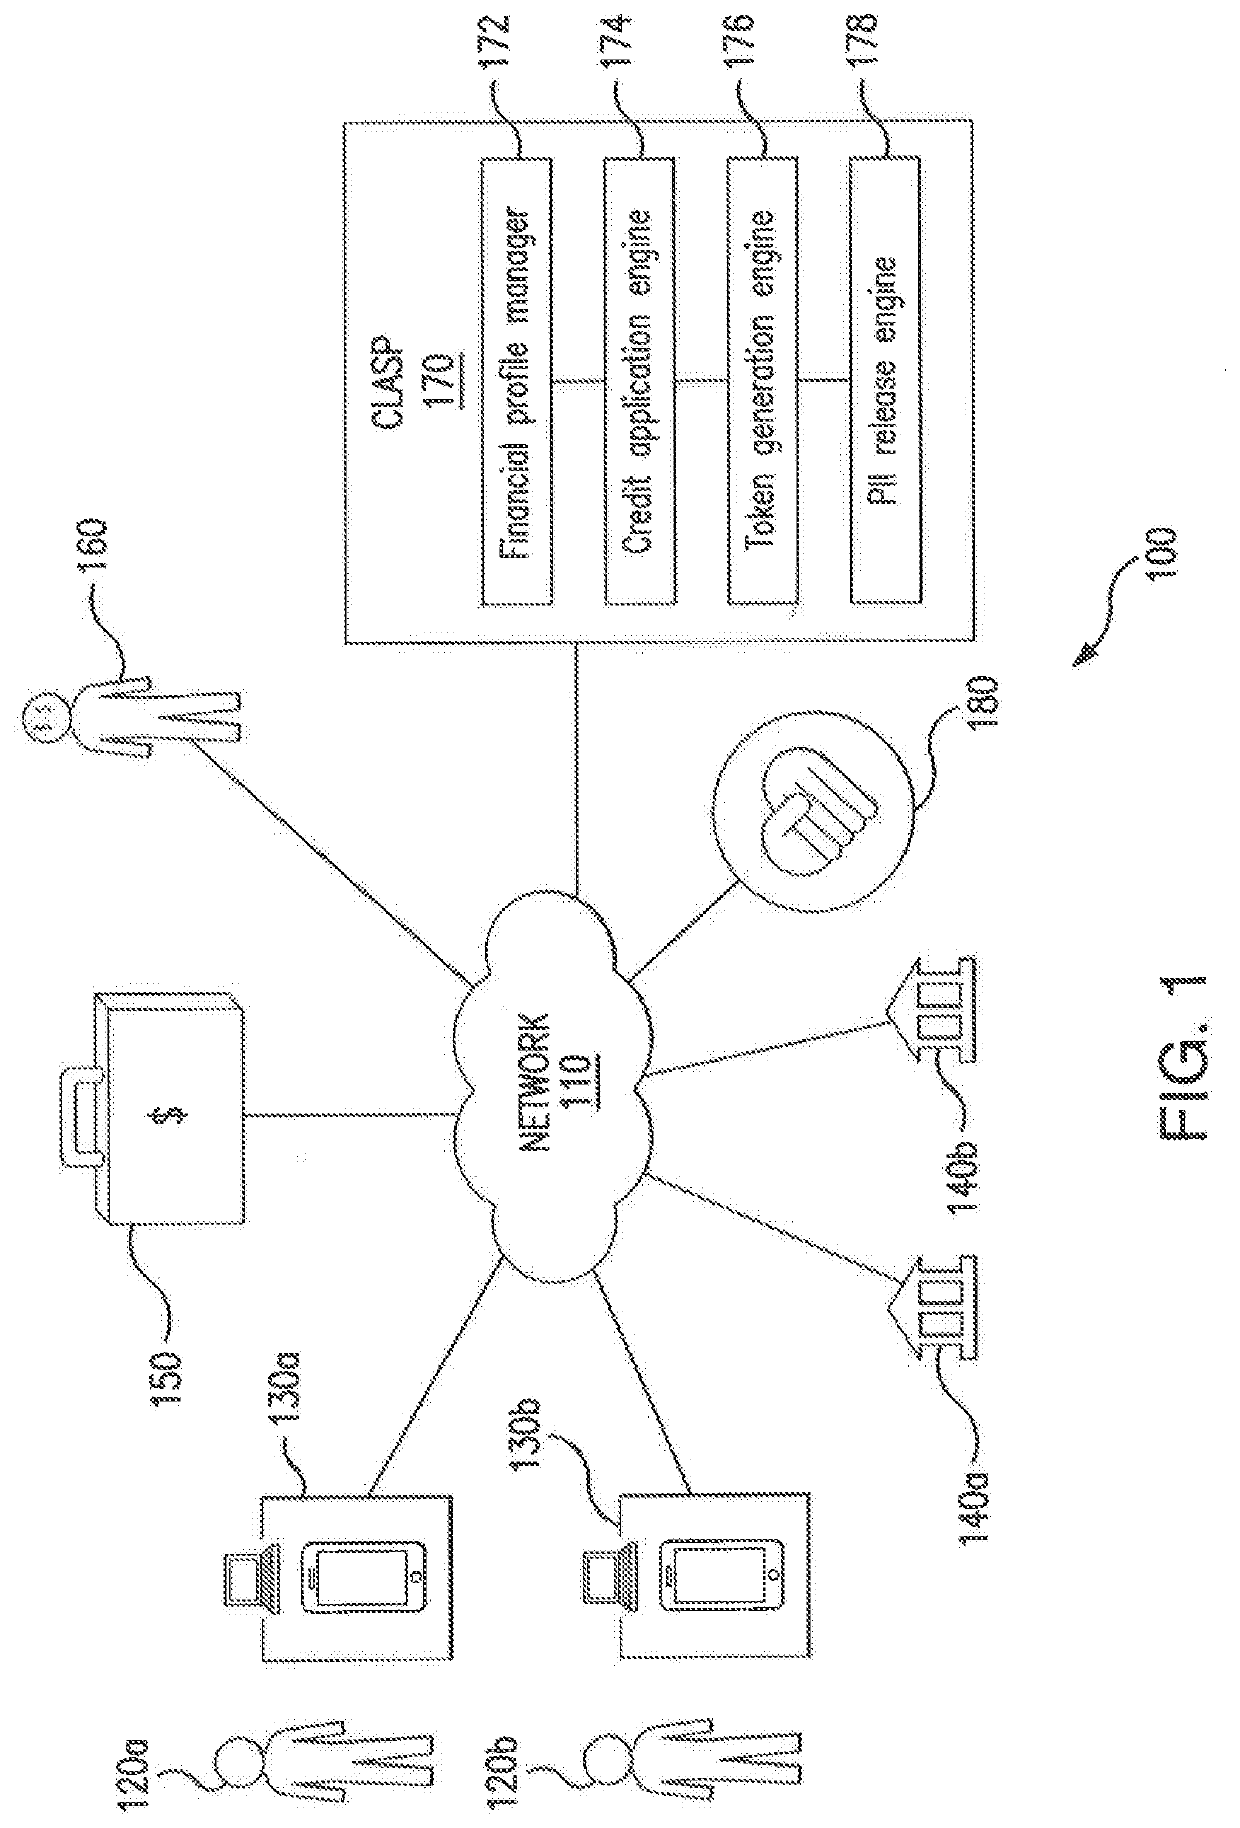 Systems and methods of securing sensitive data